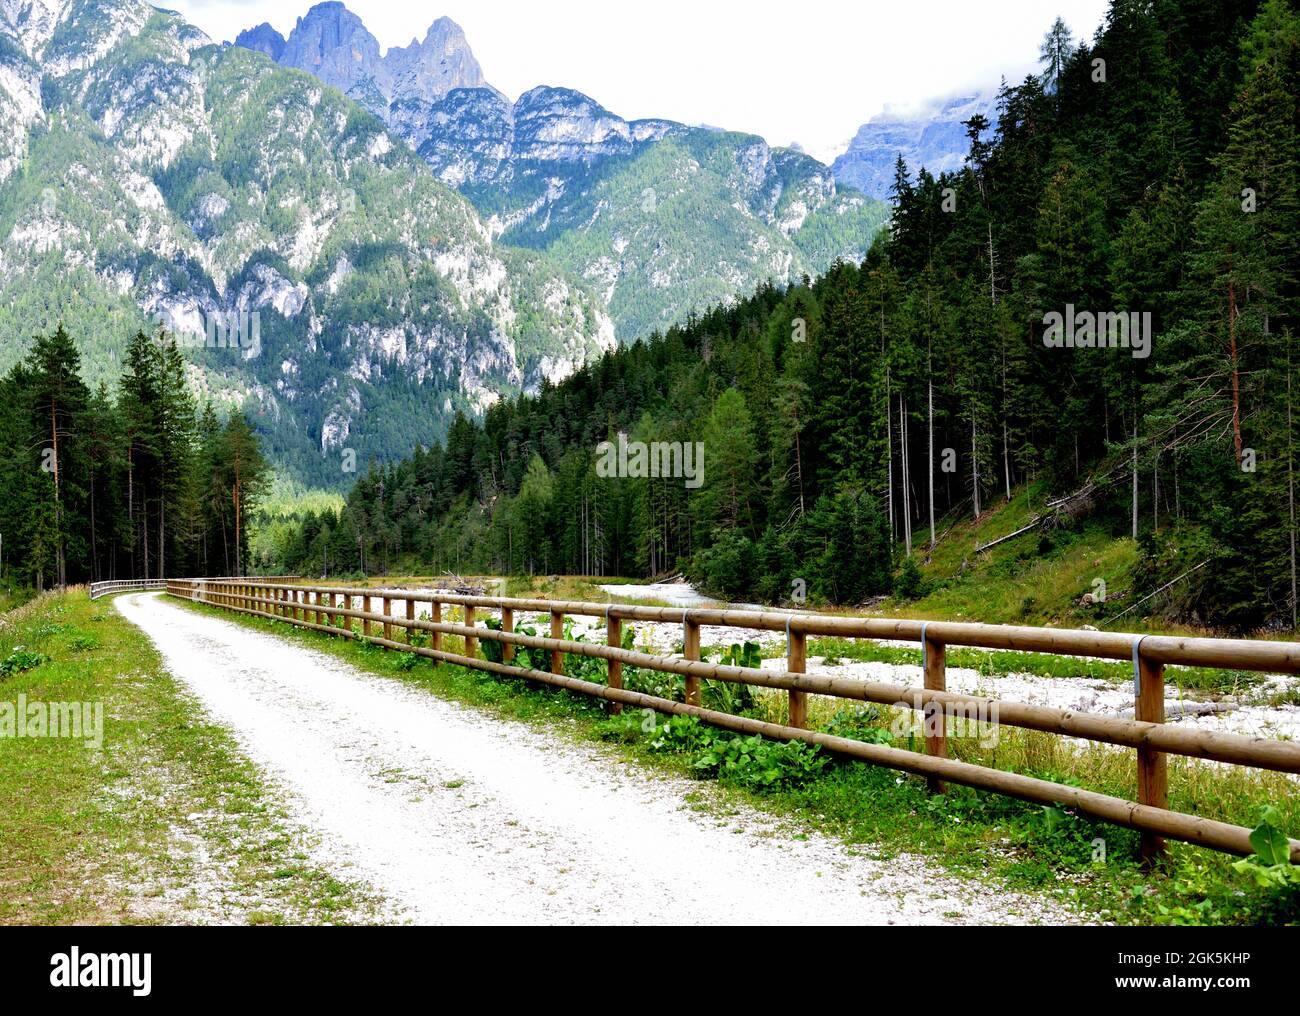 A cycle path has been set up in the Ansiei river valleythat connects the villages of Auronzo di Cadore and Misurina in complete safety Stock Photo